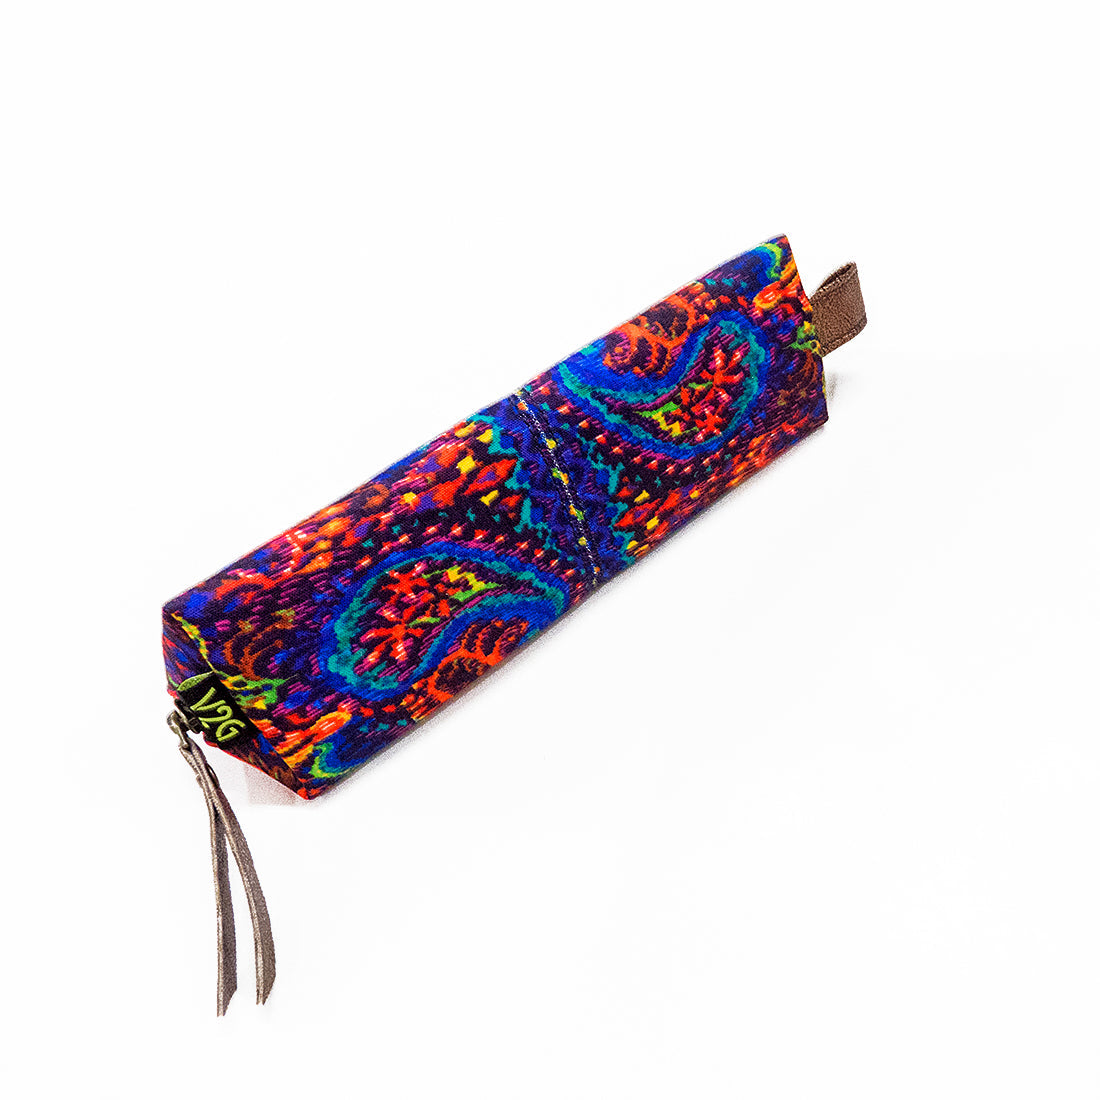 Stationary or MakeUp Pouch- Patola Rug